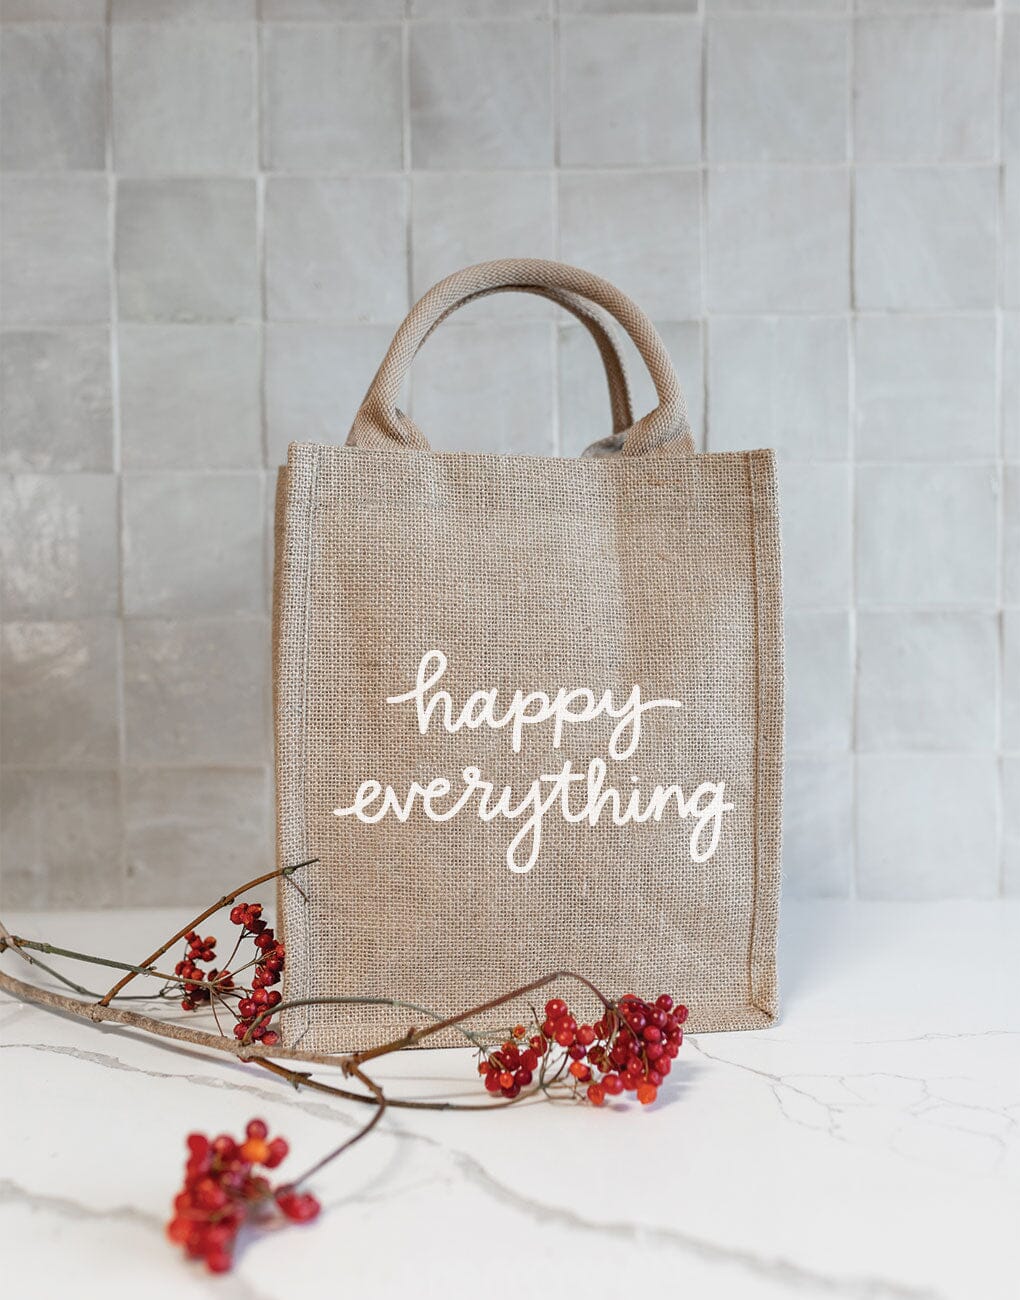 Happy Everything Reusable Gift Totes | The Little Market